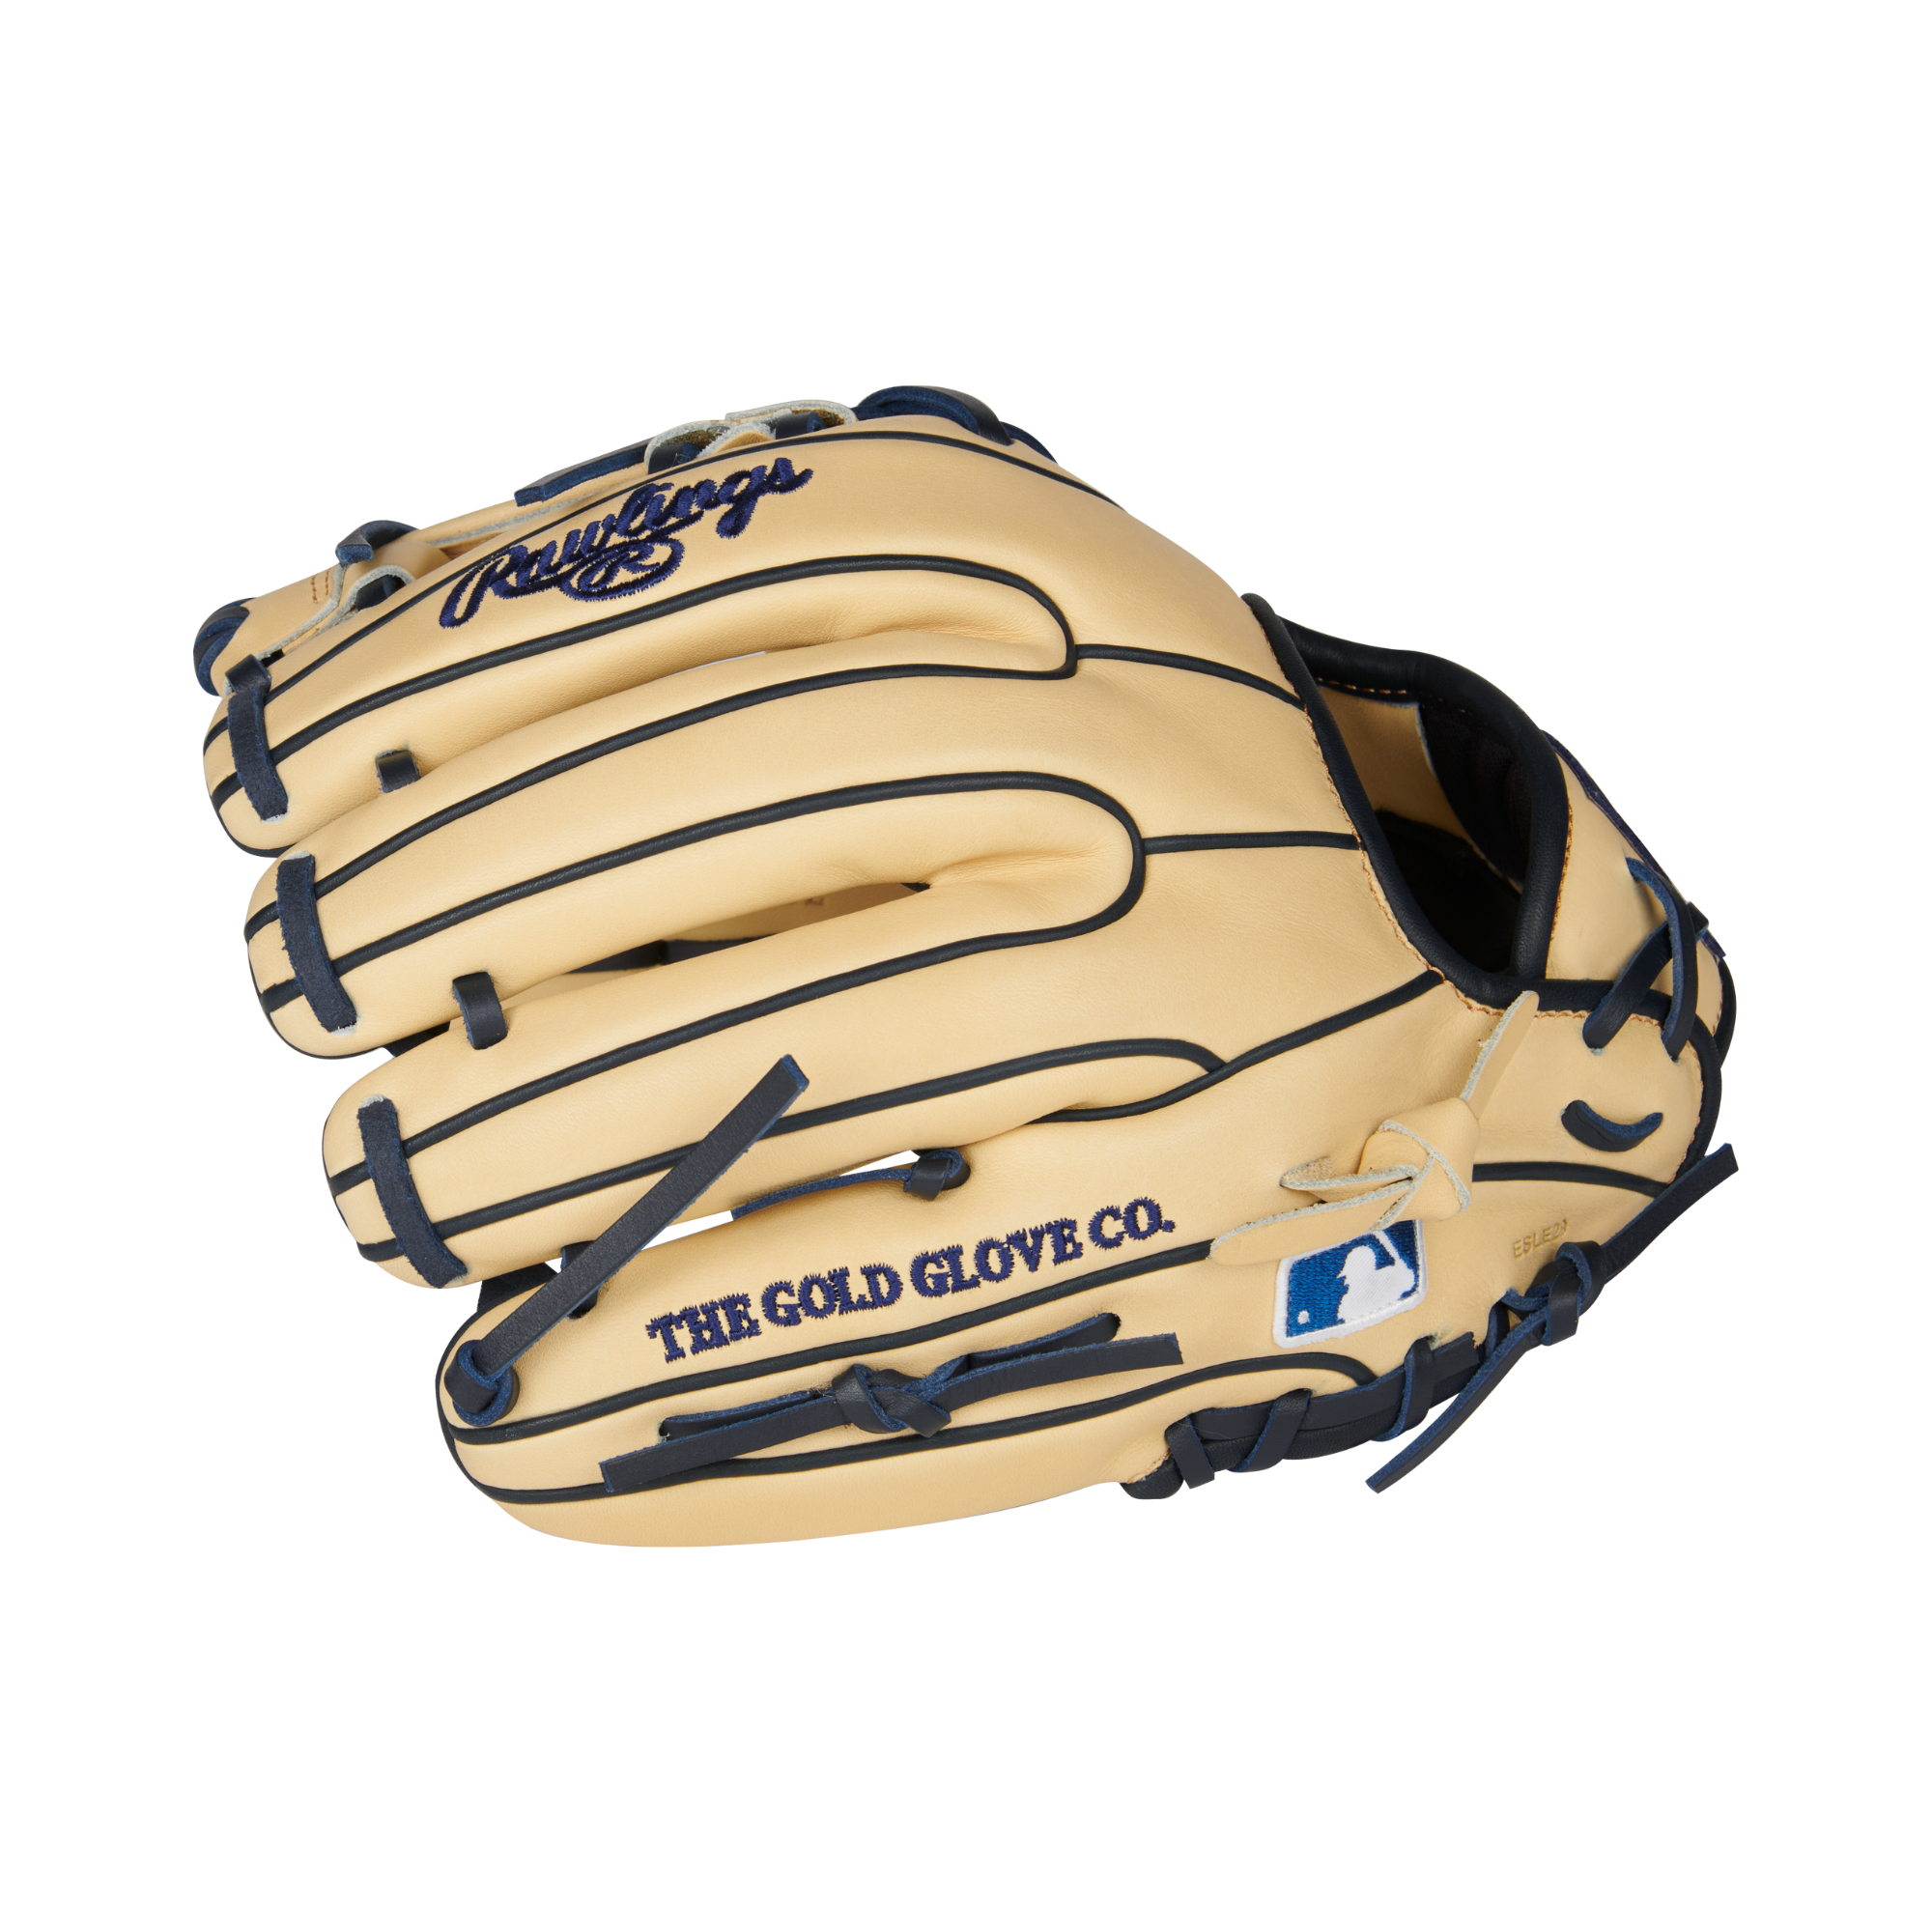 Rawlings Heart of the Hide R2G Contour Fit Infield Glove 11 1/2